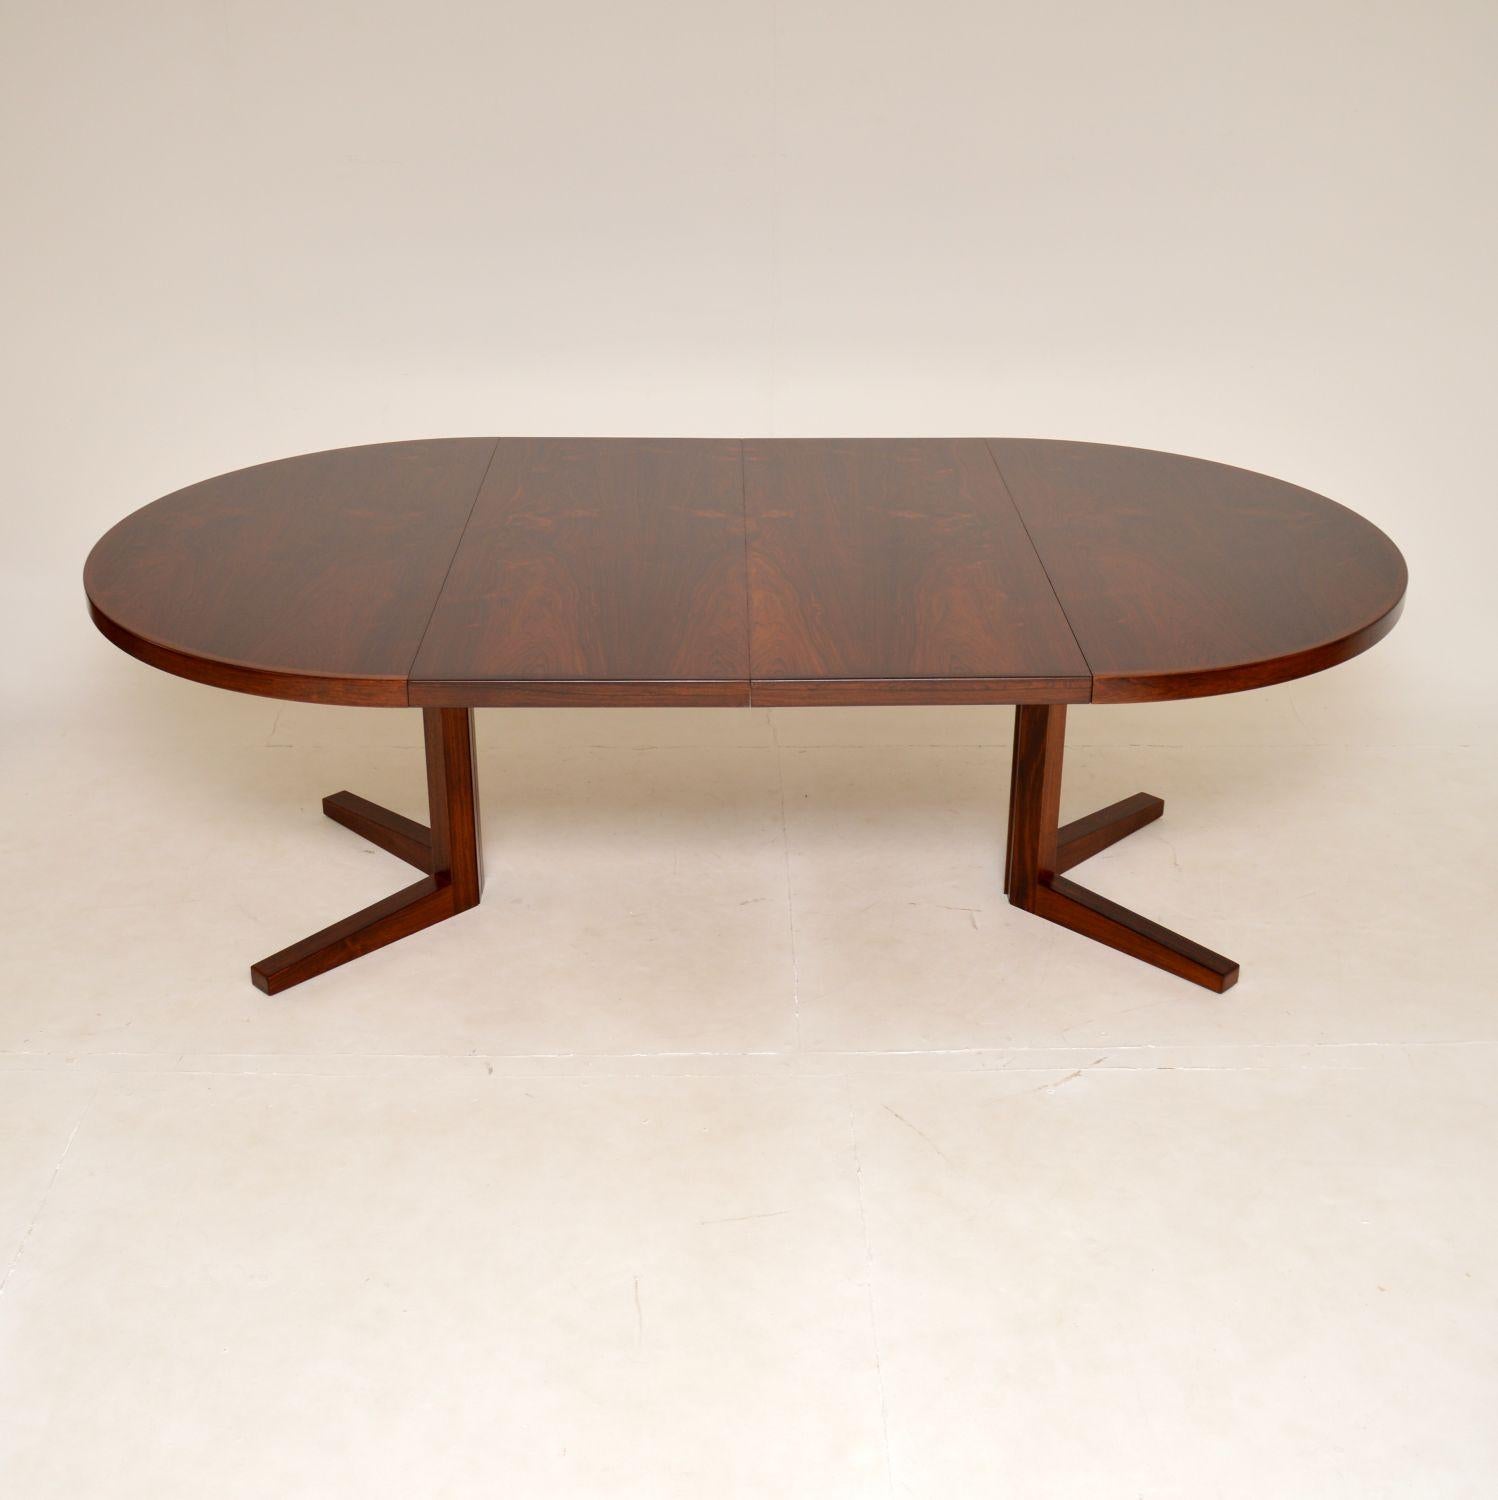 A very large, stylish and impressive vintage Danish circular dining table. This was designed by John Mortensen, it was made by Heltborg Mobler in Denmark around the 1960s.

The quality is absolutely outstanding, and it has a very clever design